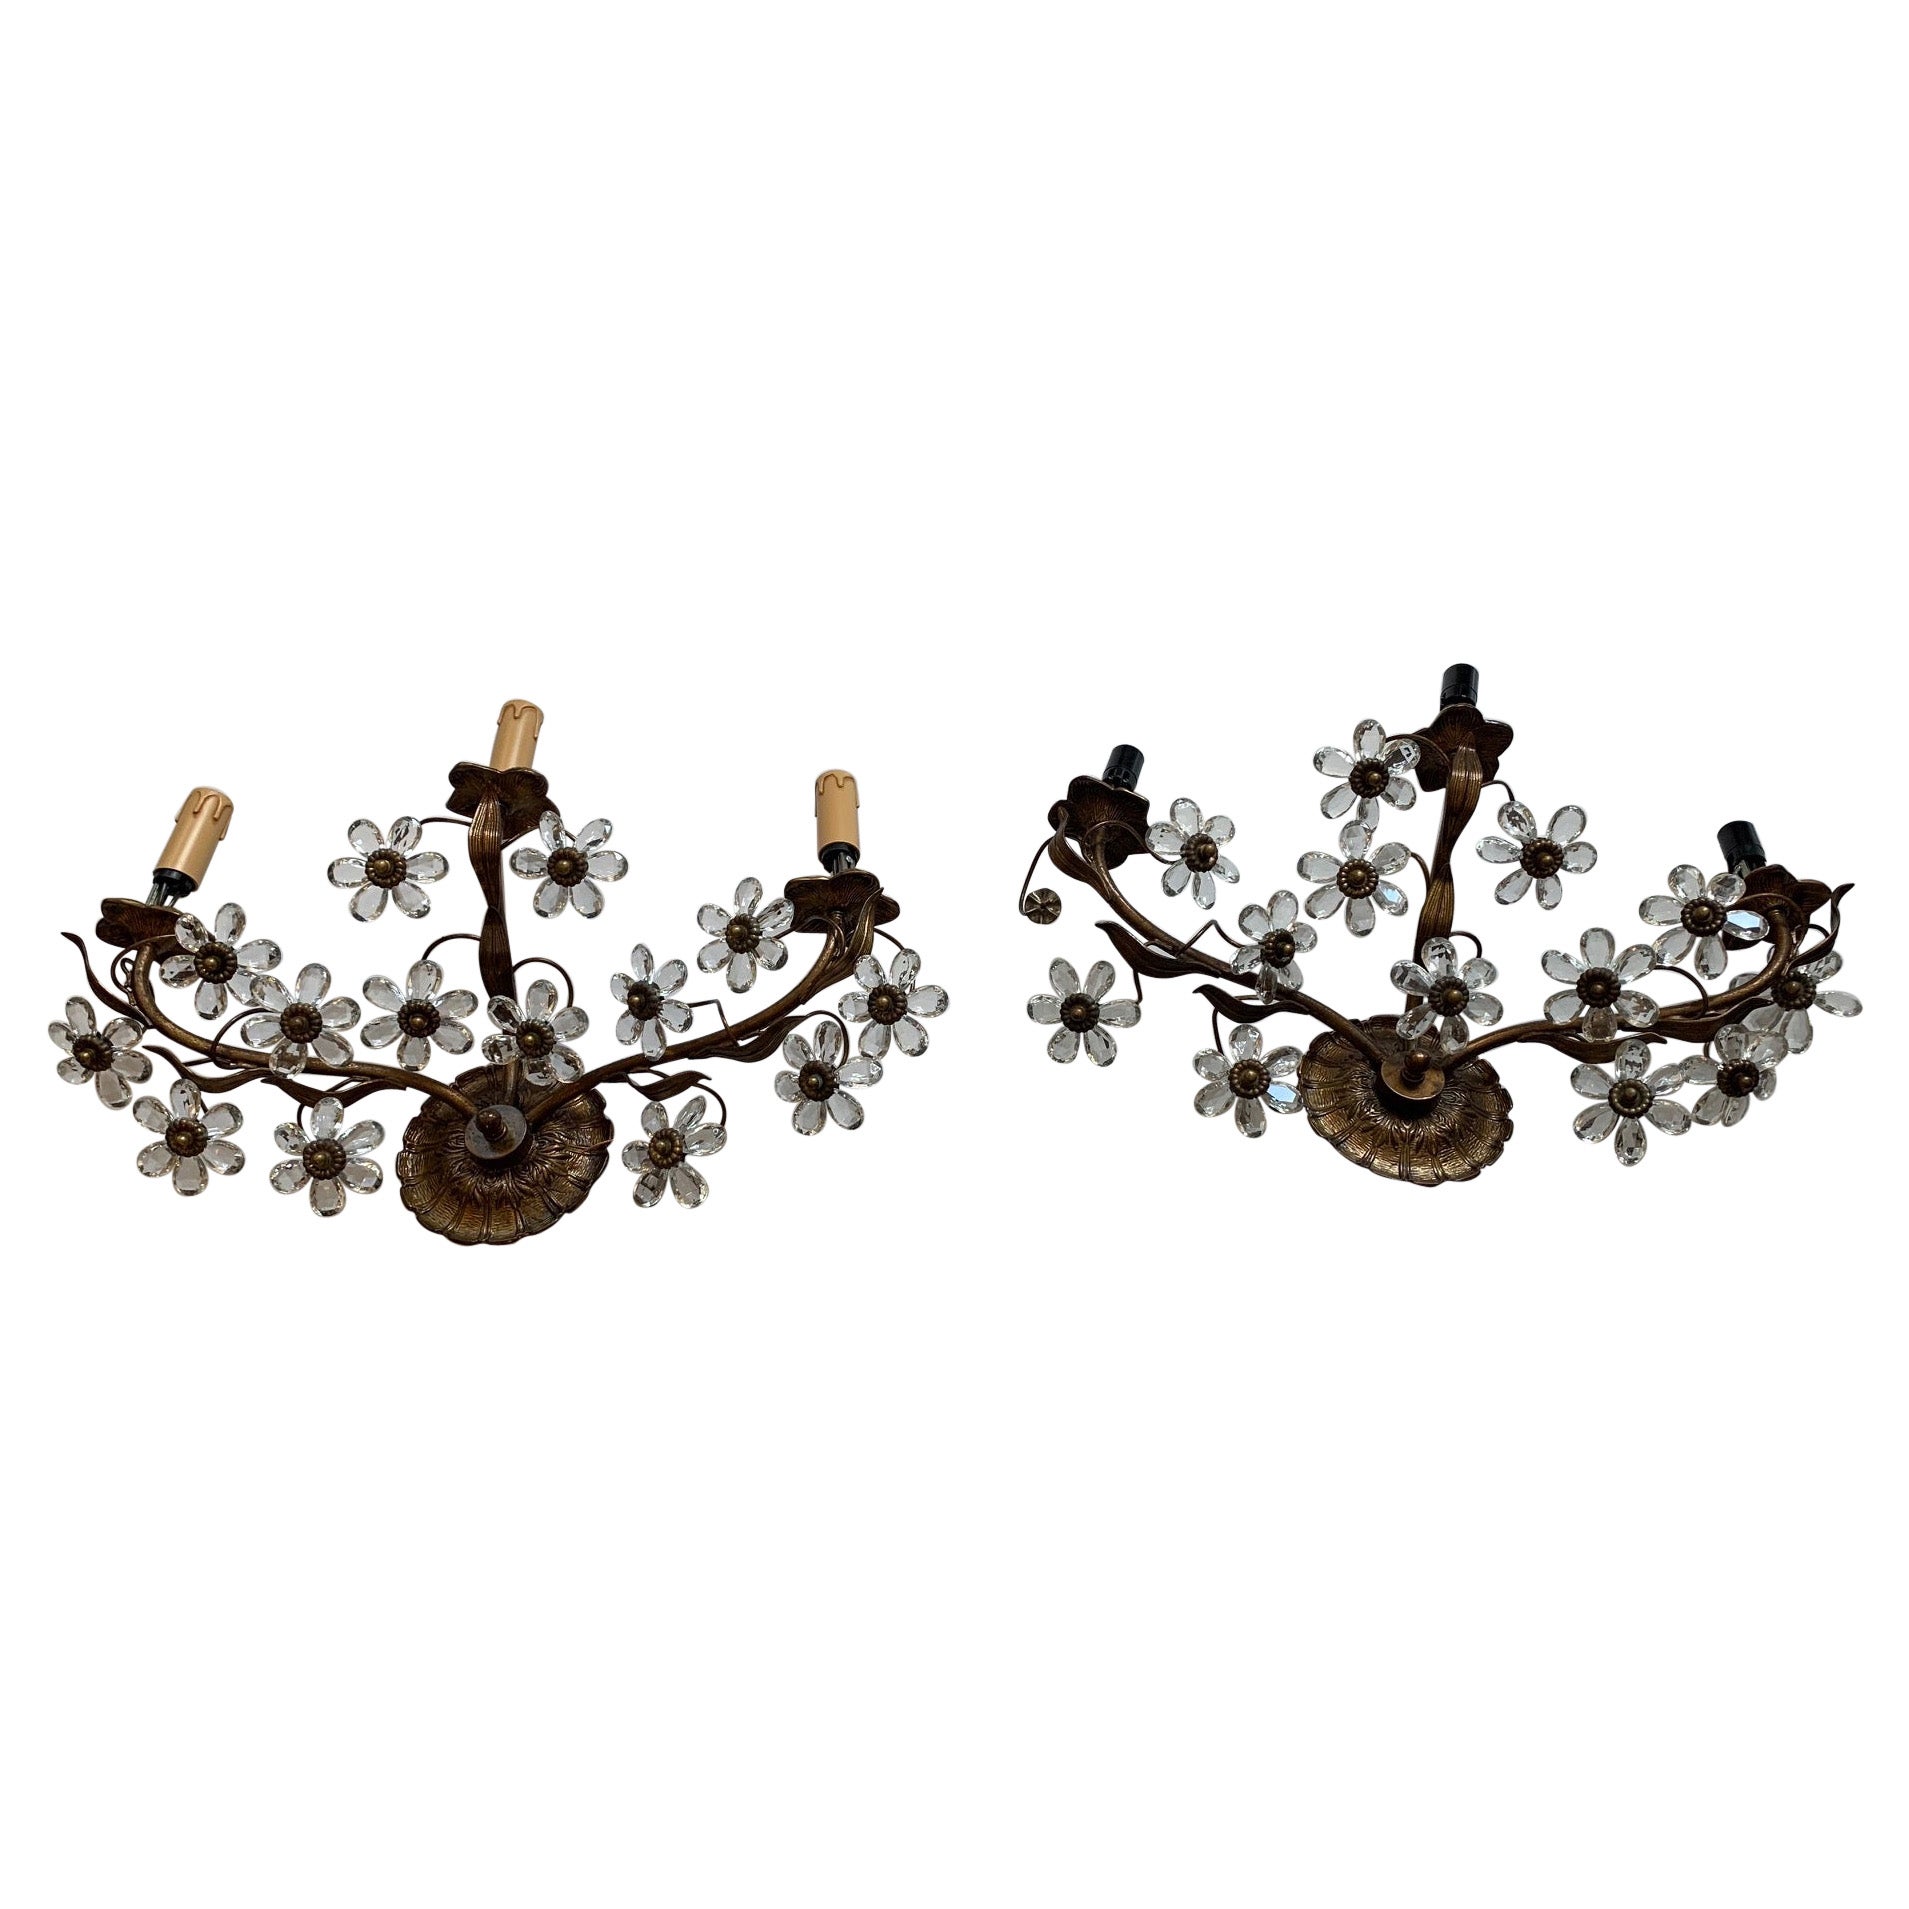 Whimsical Pair of Italian 3 Arm Sconces Encrusted with Crystal Flowers